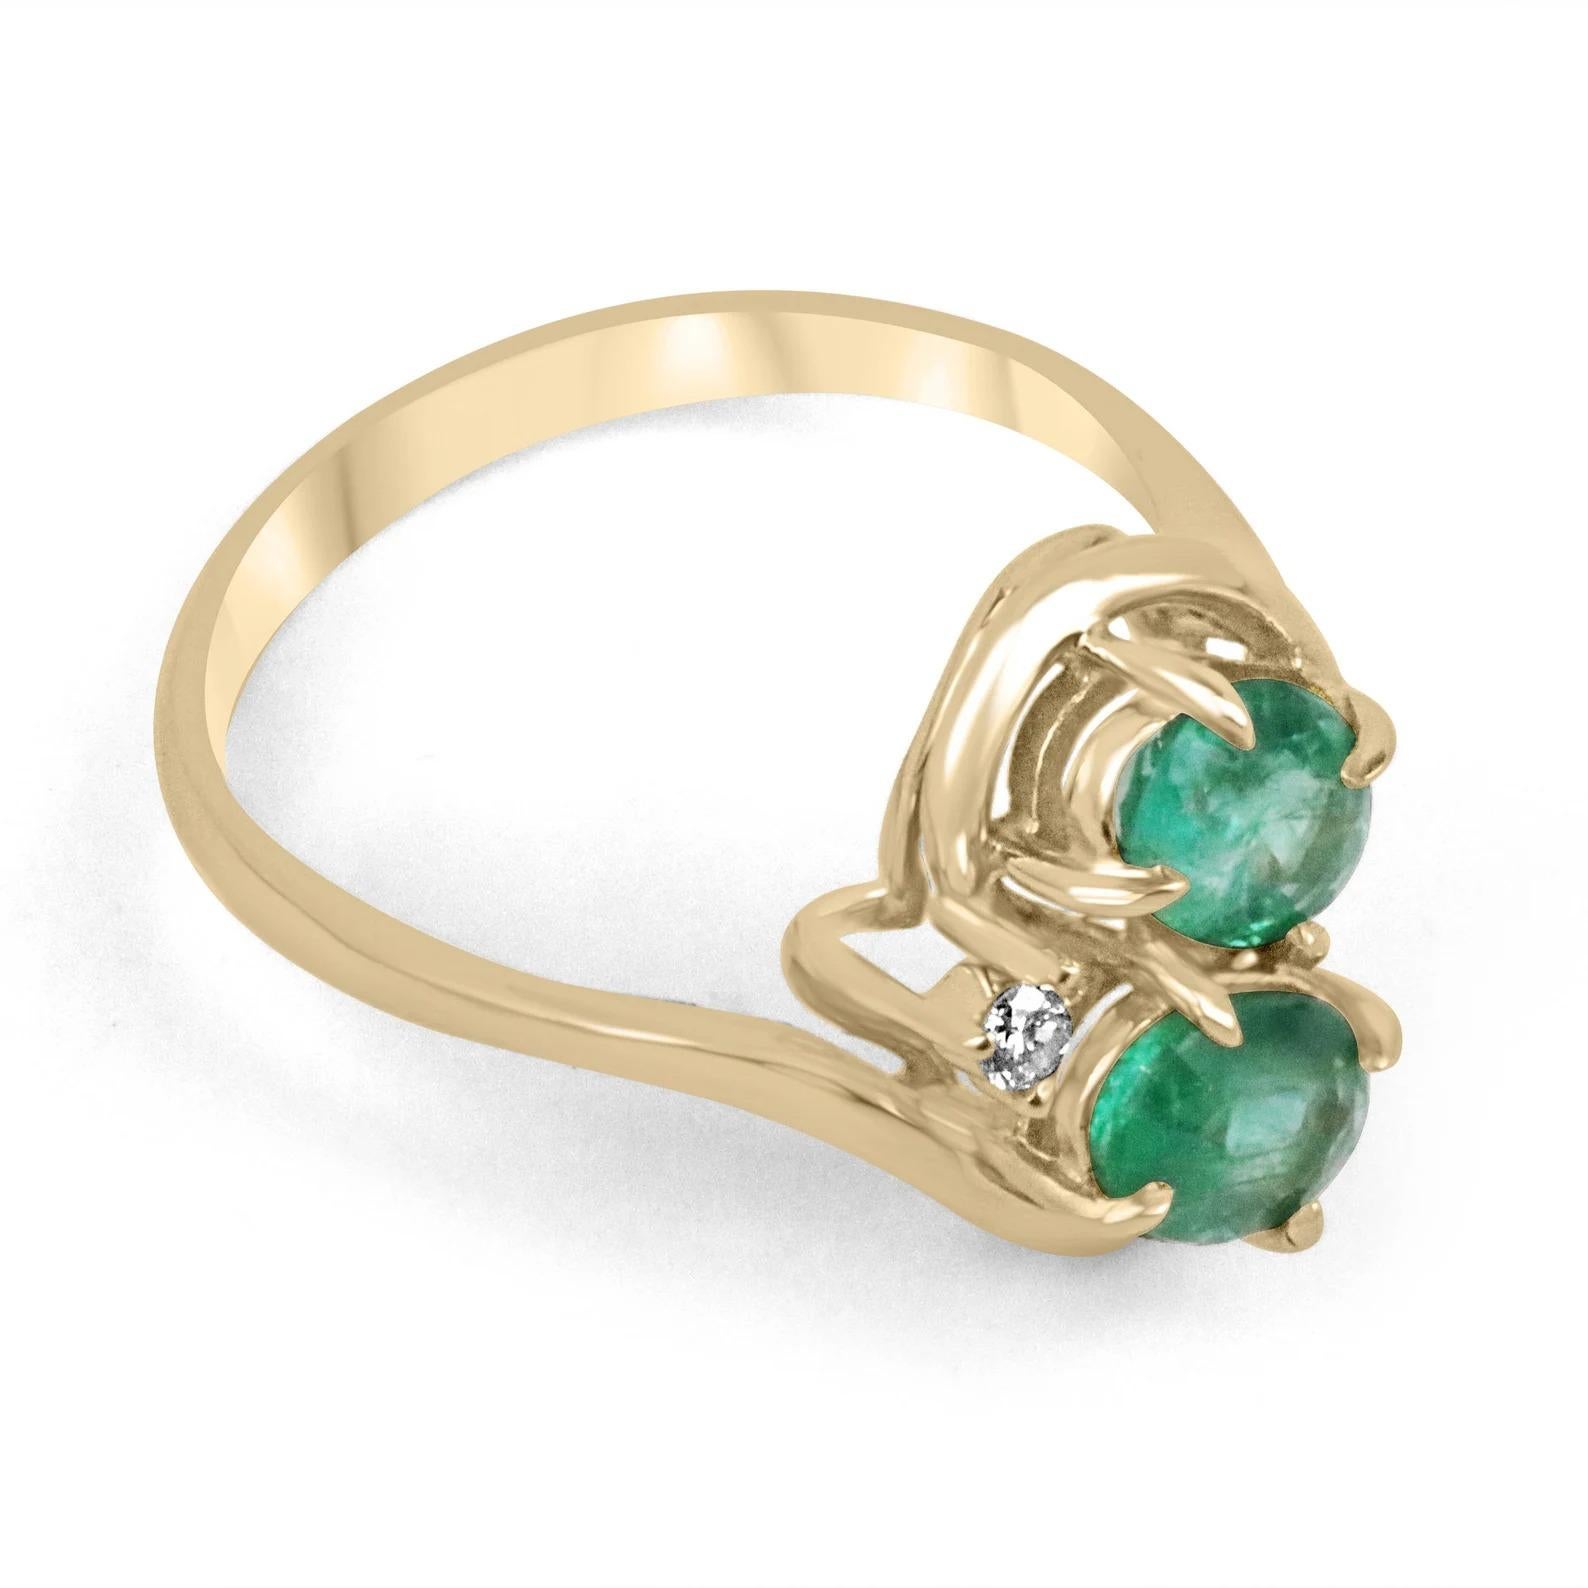 A double oval natural emerald & diamond ring in solid 14K yellow gold. Two, medium-green natural emeralds are used in this unique dual setting. The gemstones have the same beautiful color and similar eye clarity. No two emeralds are alike and this